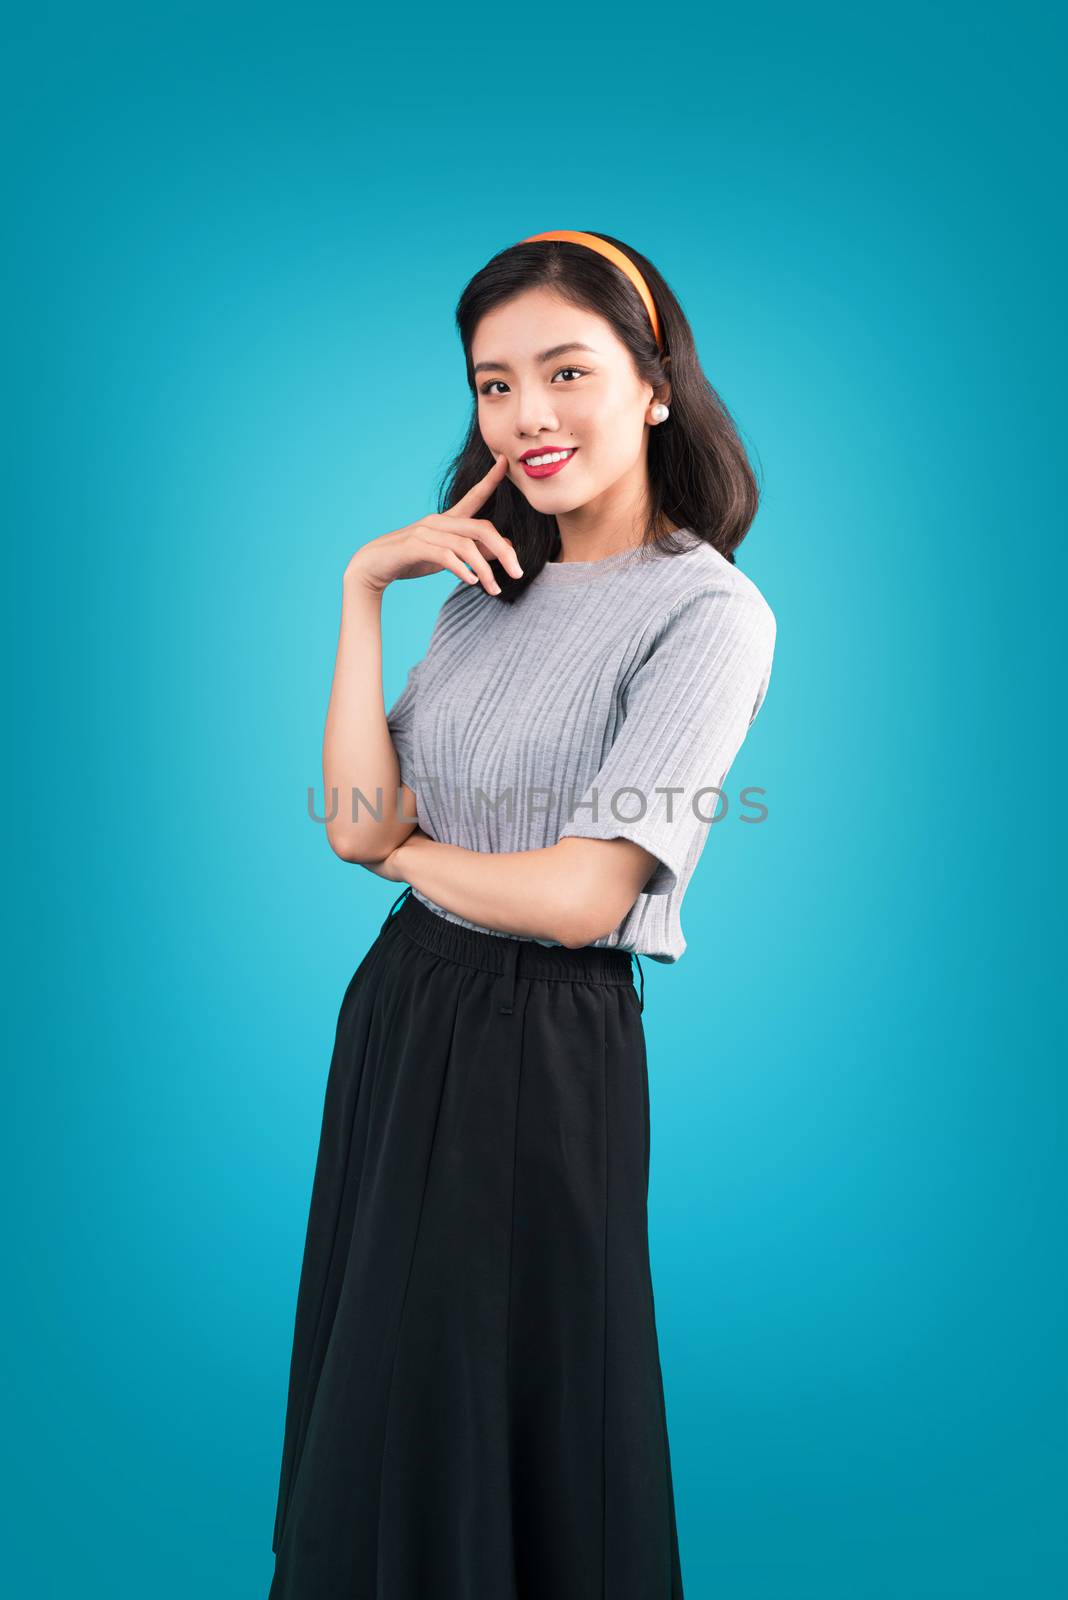 Smiling lovely asian woman dressed in pin-up style dress over blue.